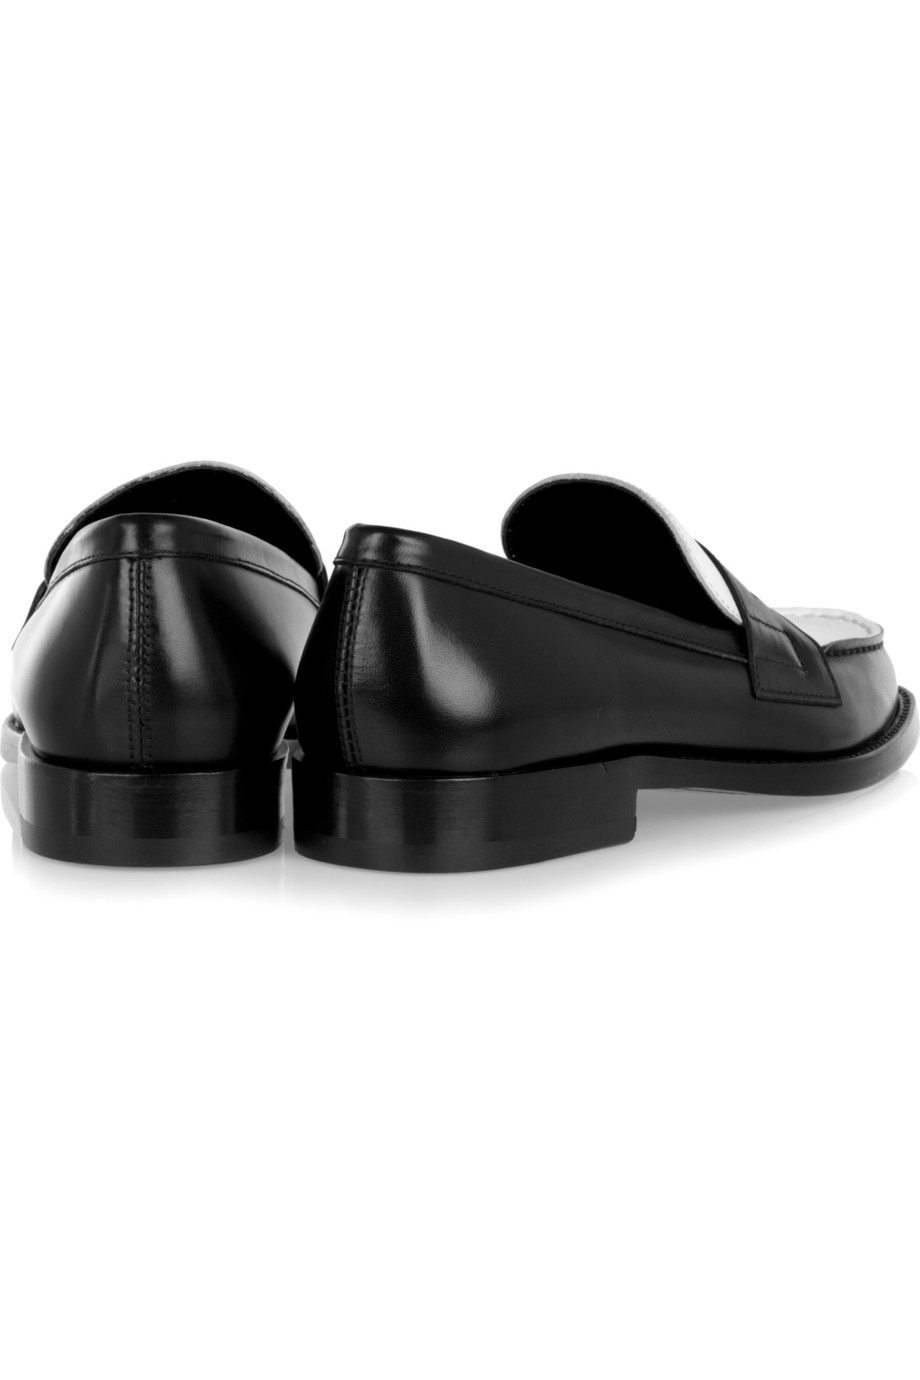 Saint Laurent Two-Tone Leather Penny Loafers in Black (White) - Lyst